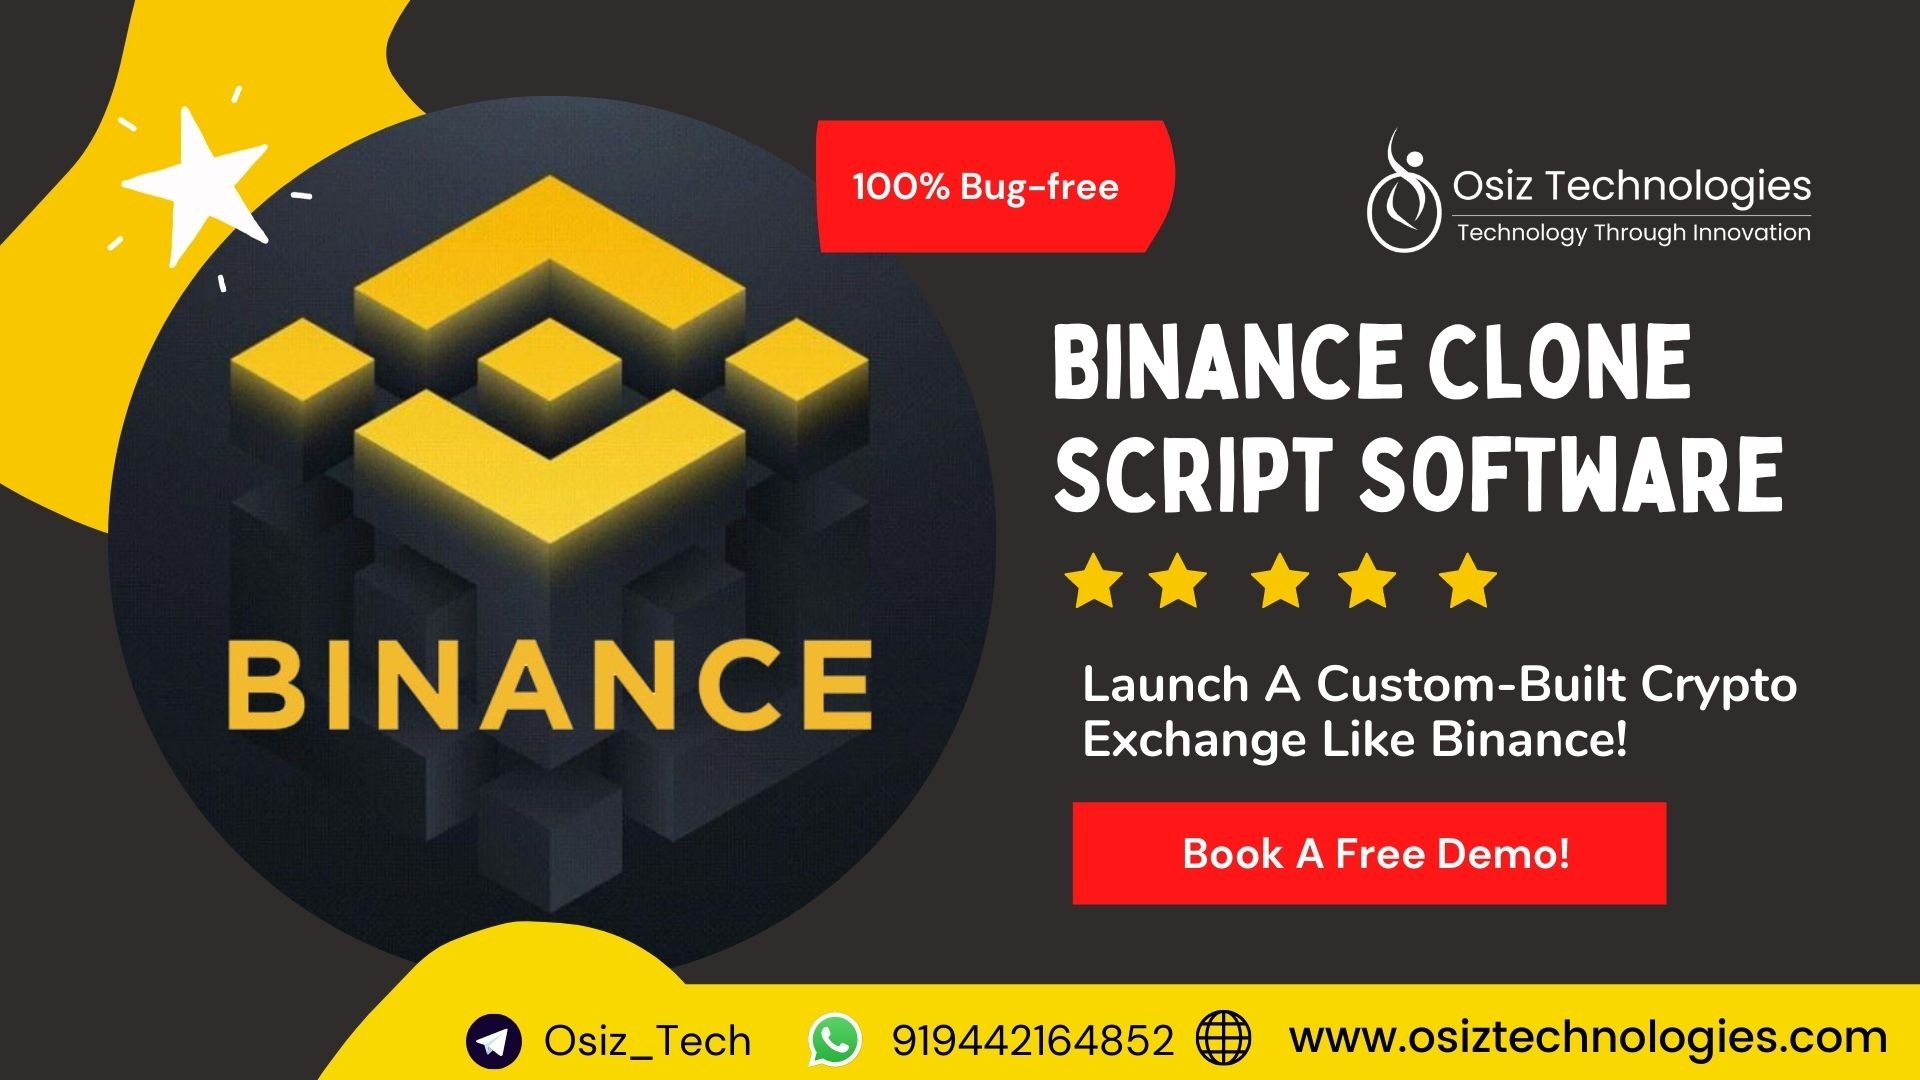 Article about Build your own Crypto Exchange App like Binance - Osiz Technologies